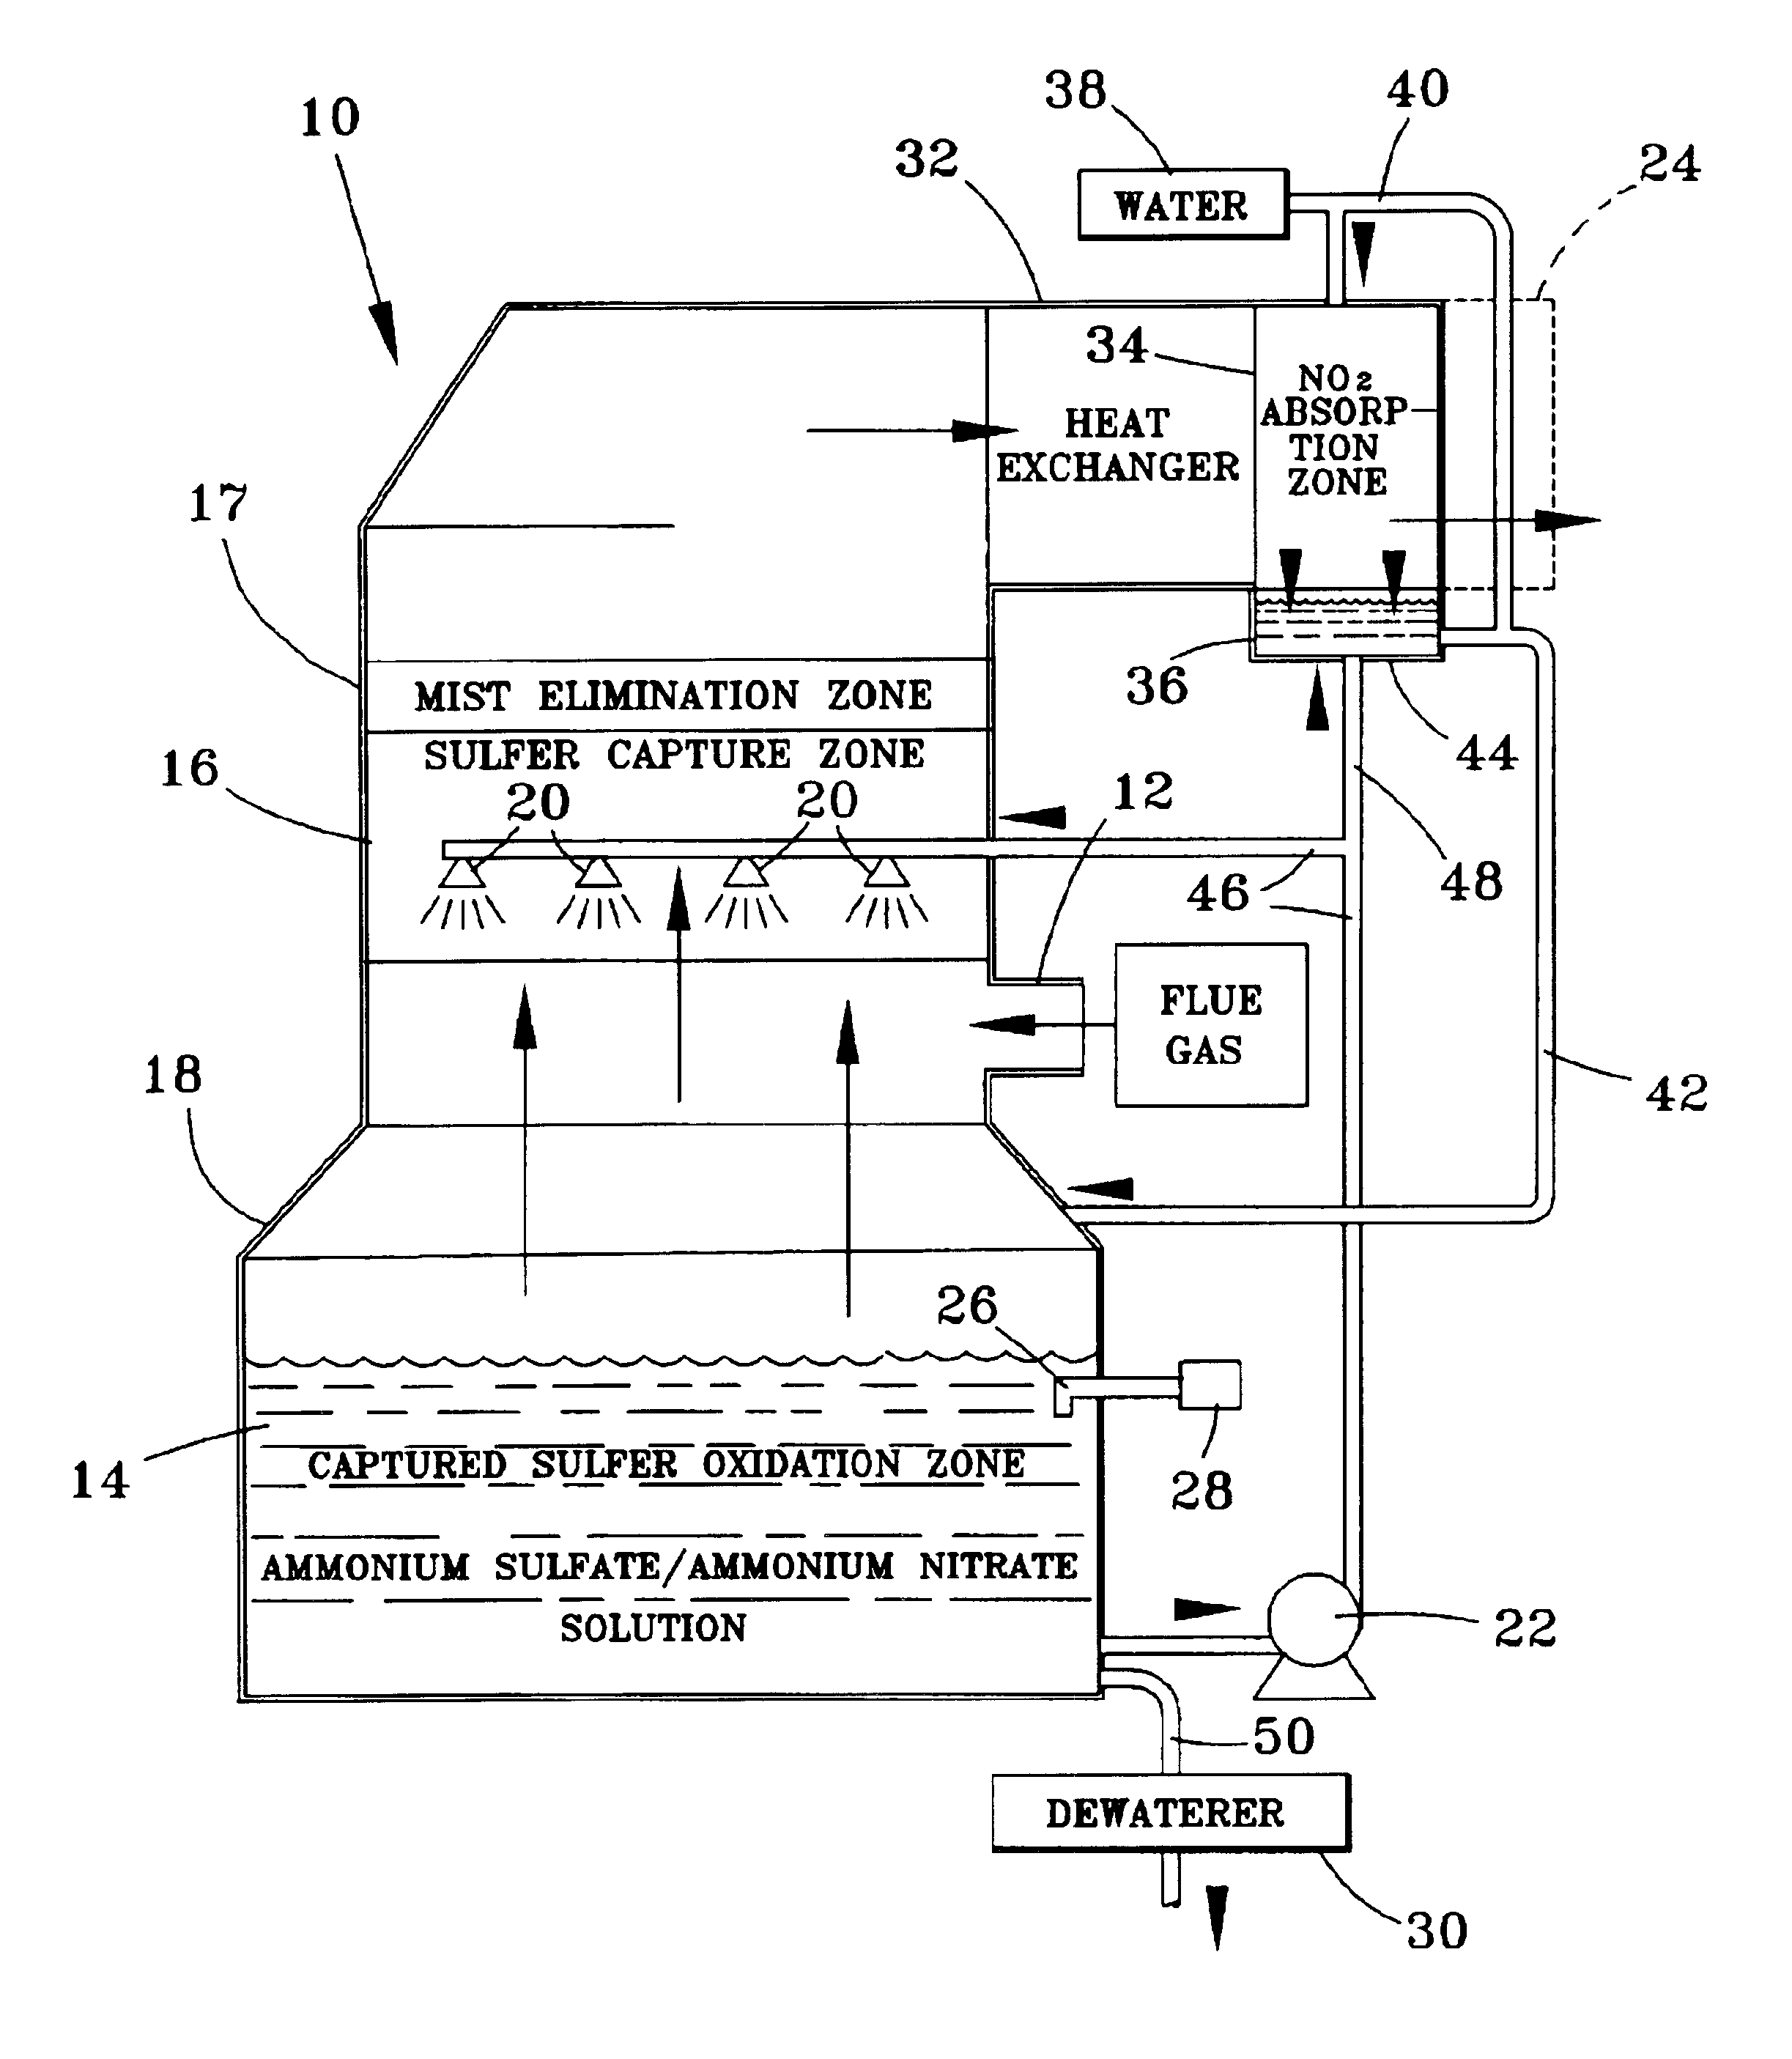 Flue gas desulfurization process and apparatus for removing nitrogen oxides